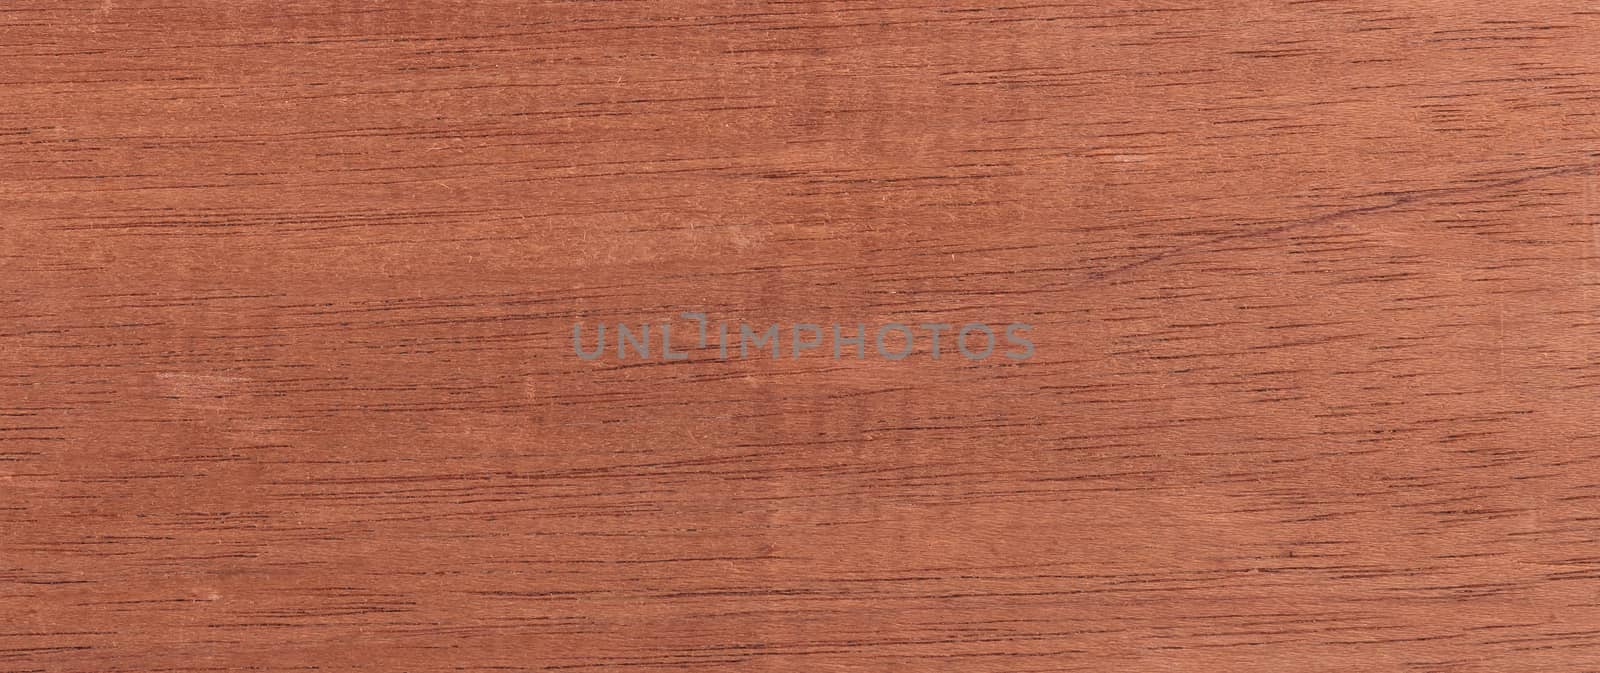 Wood background - Wood from the tropical rainforest - Suriname - Carapa guianensis Aubl